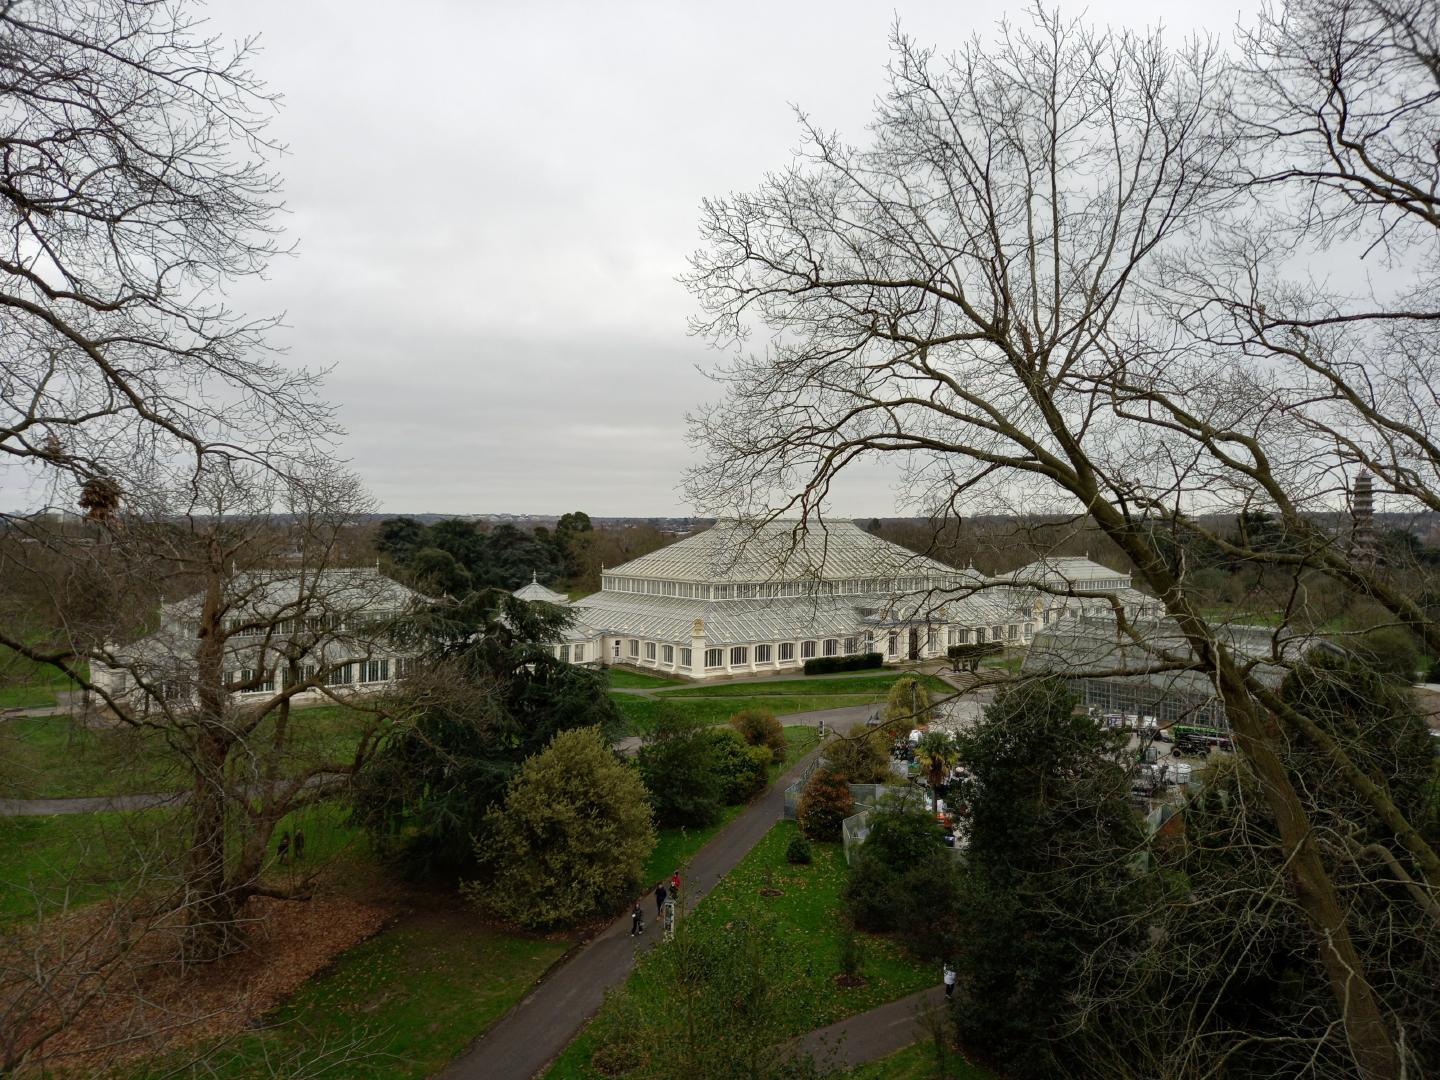 Temperate House seen from the walkway